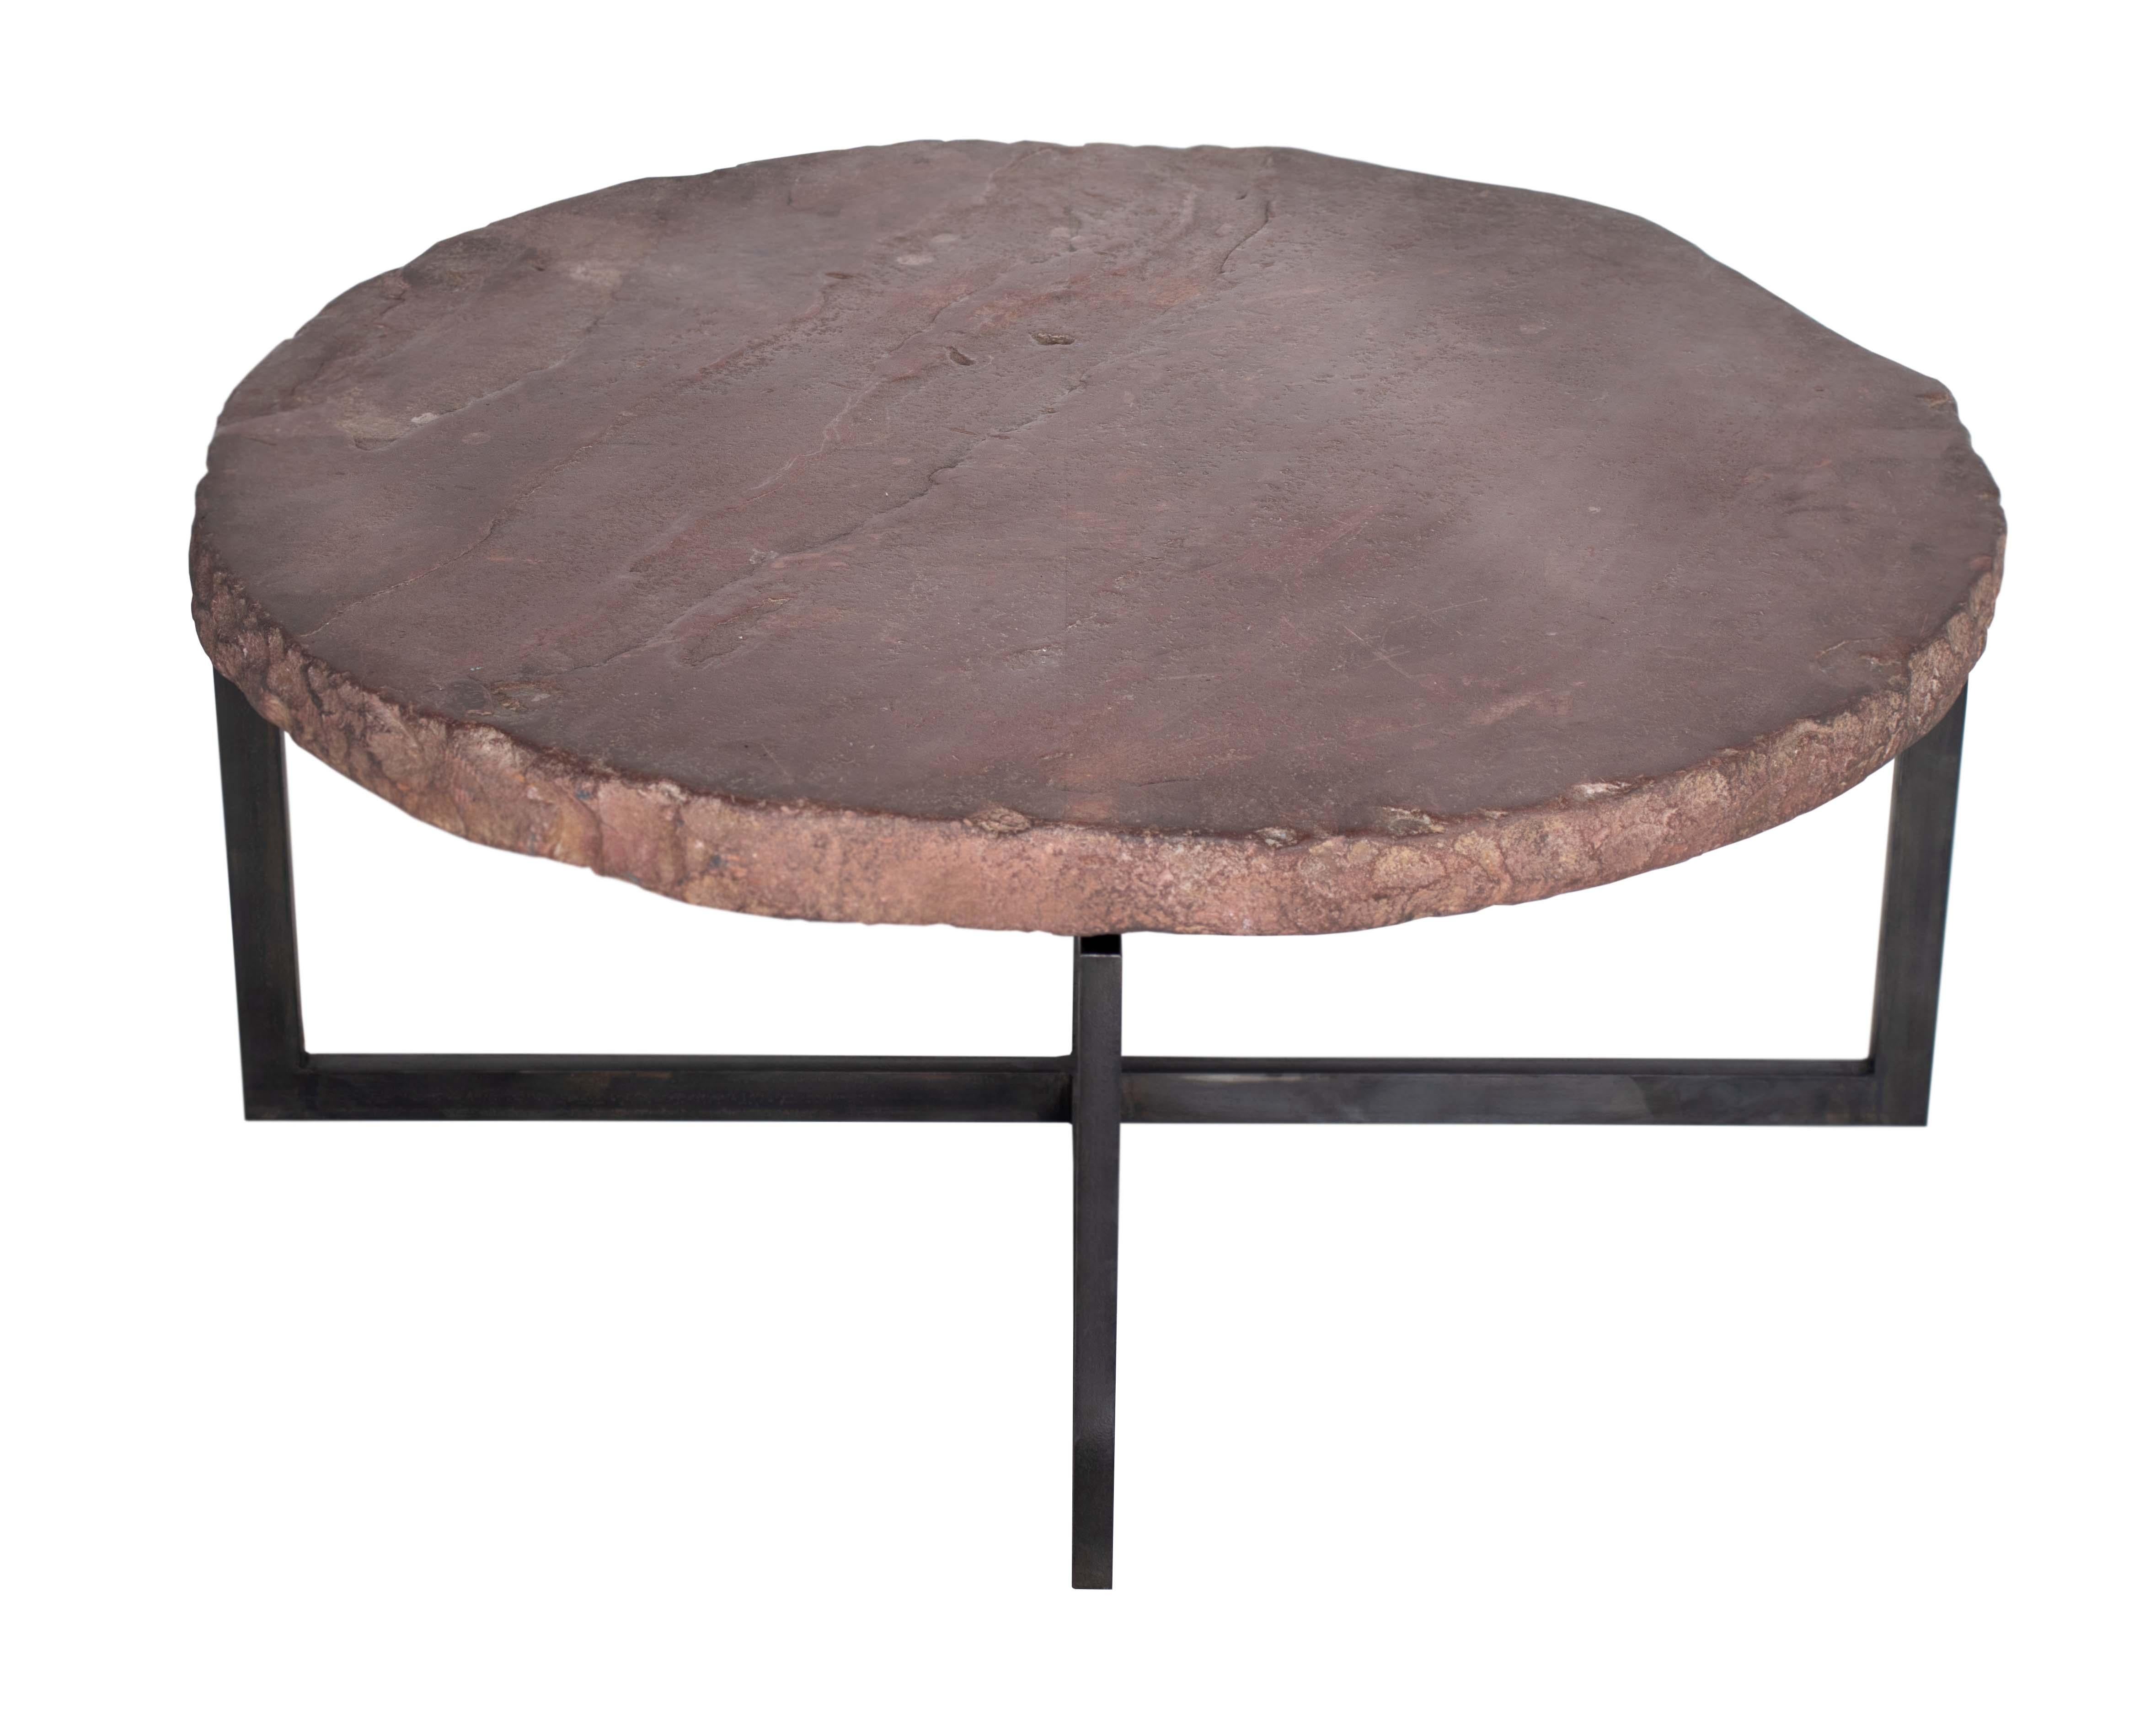 Architectural stone element on steel base coffee table. 

This piece is a part of Brendan Bass’s one-of-a-kind collection, Le Monde. French for “The World”, the Le Monde collection is made up of rare and hard to find pieces curated by Brendan from